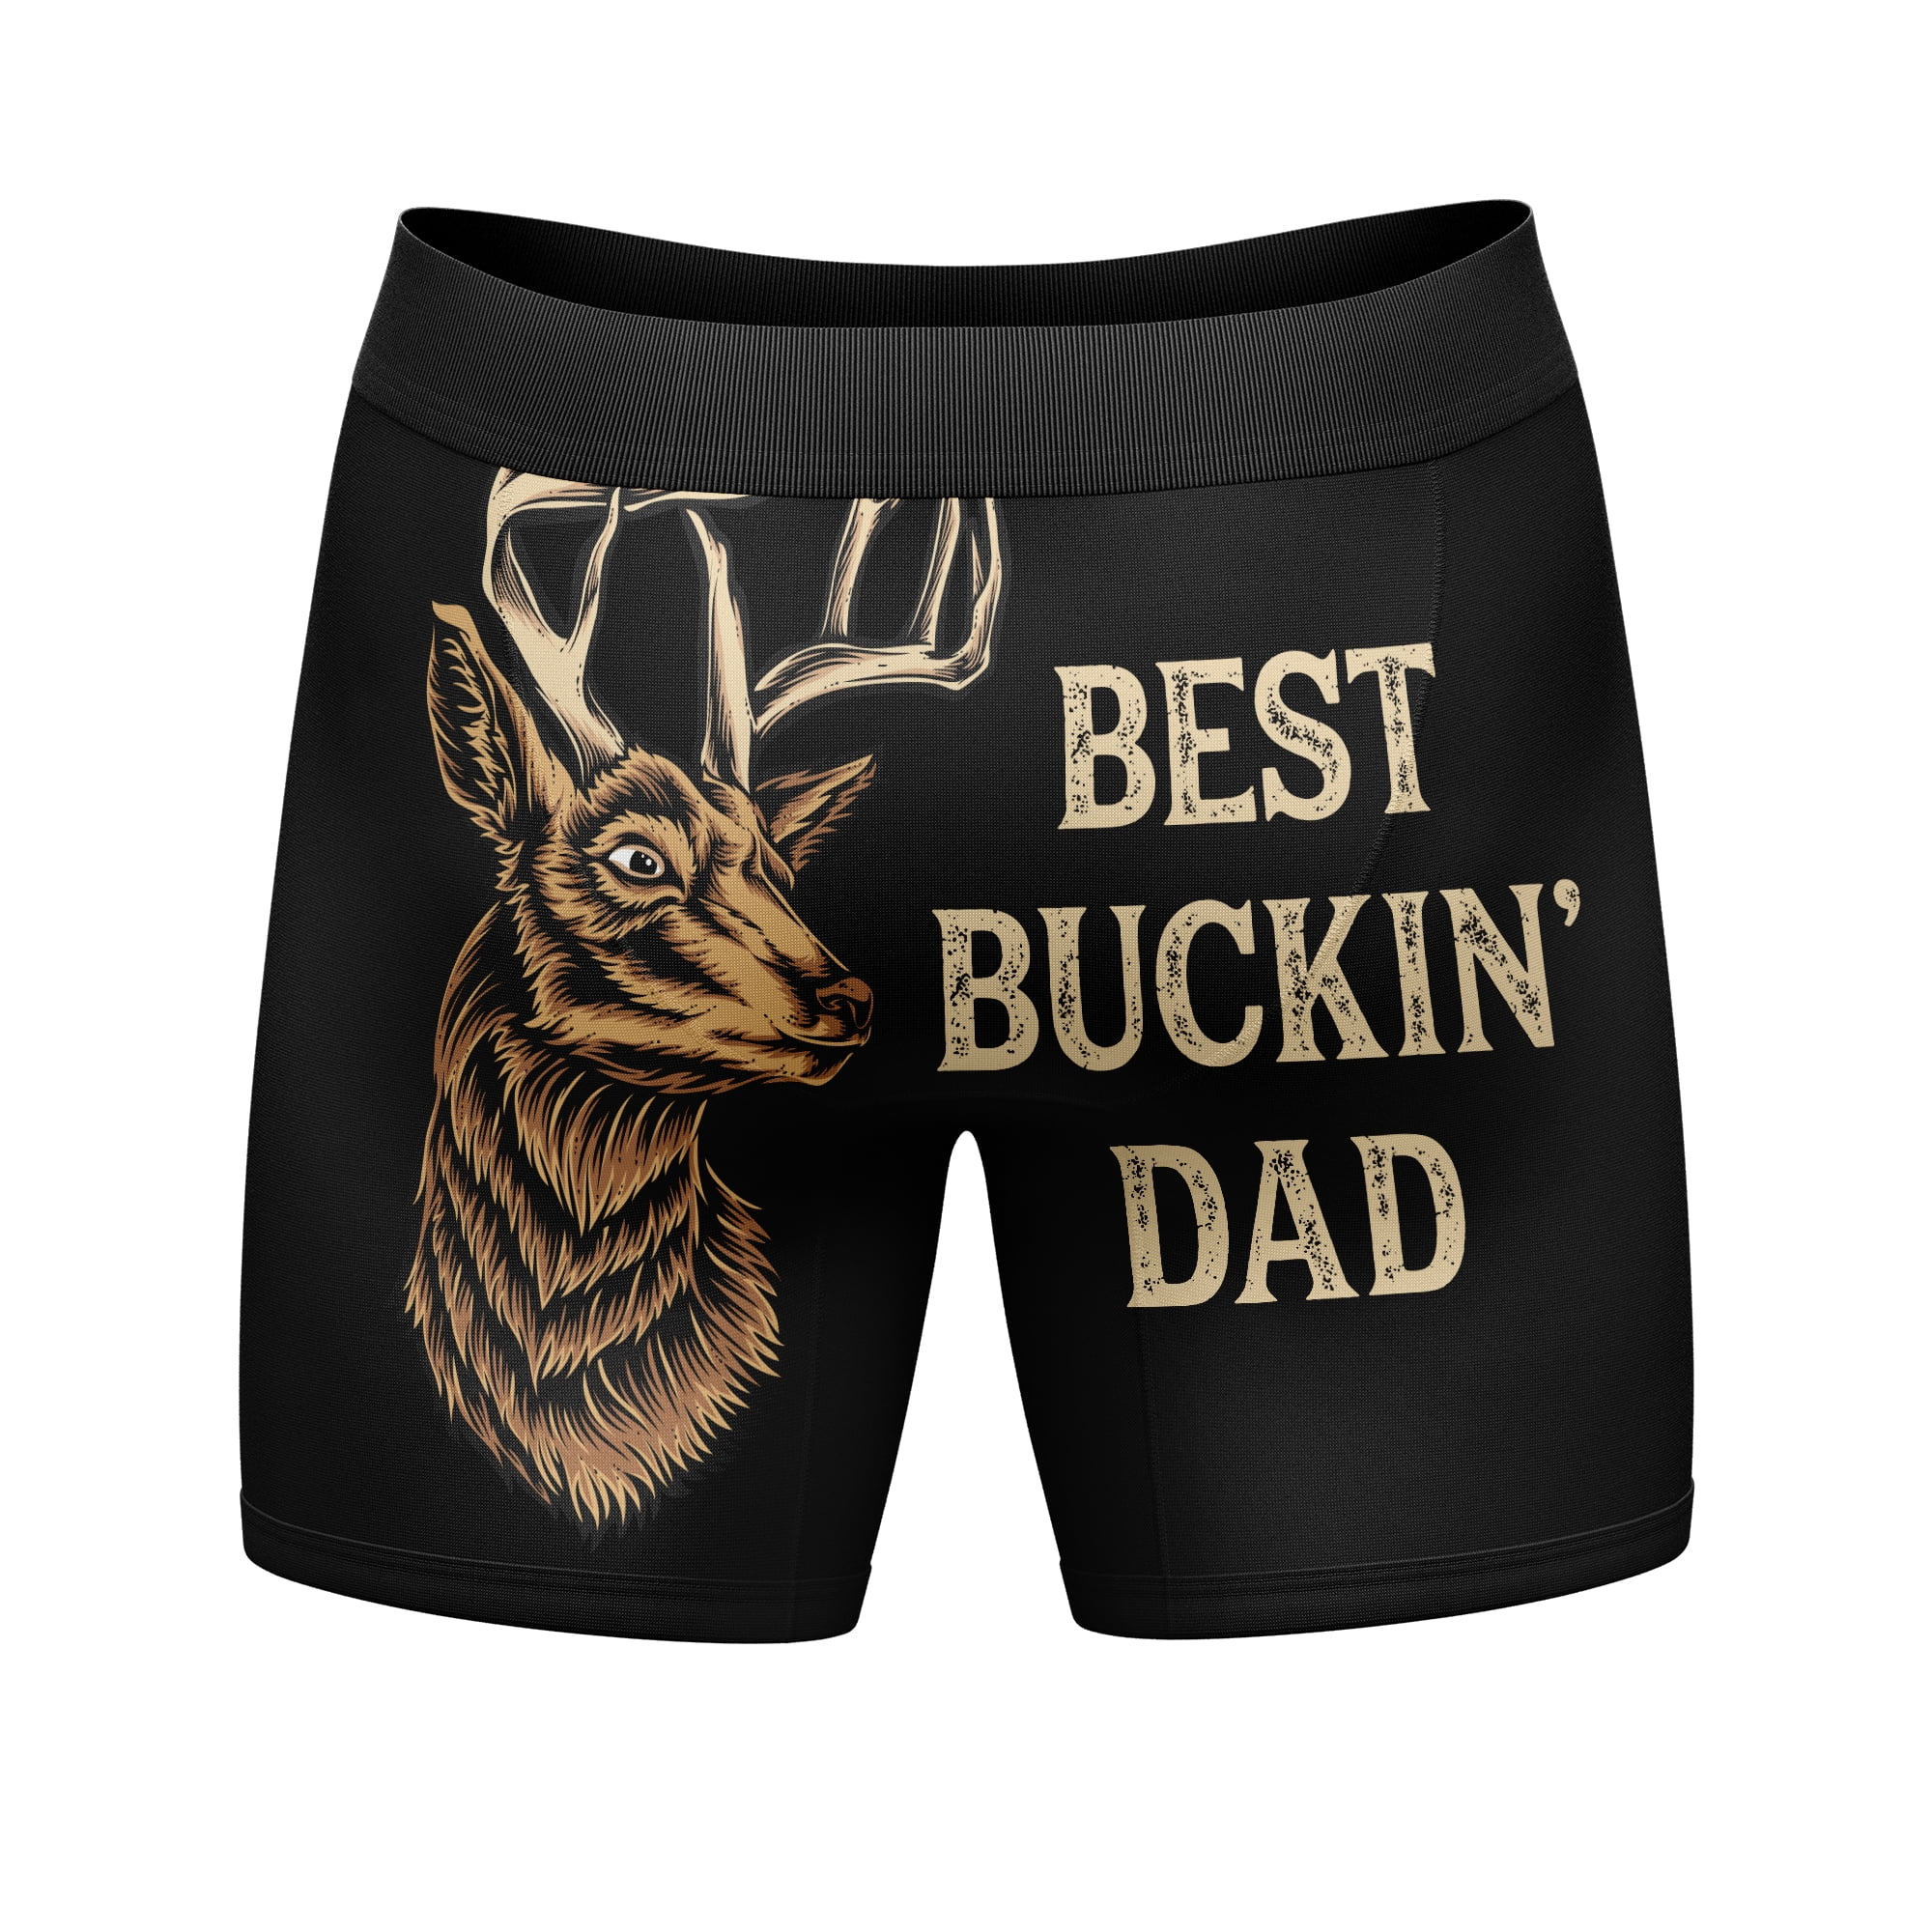 Mens Cocky Boxer Briefs Funny Sarcastic Graphic Novelty Underwear For Guys  